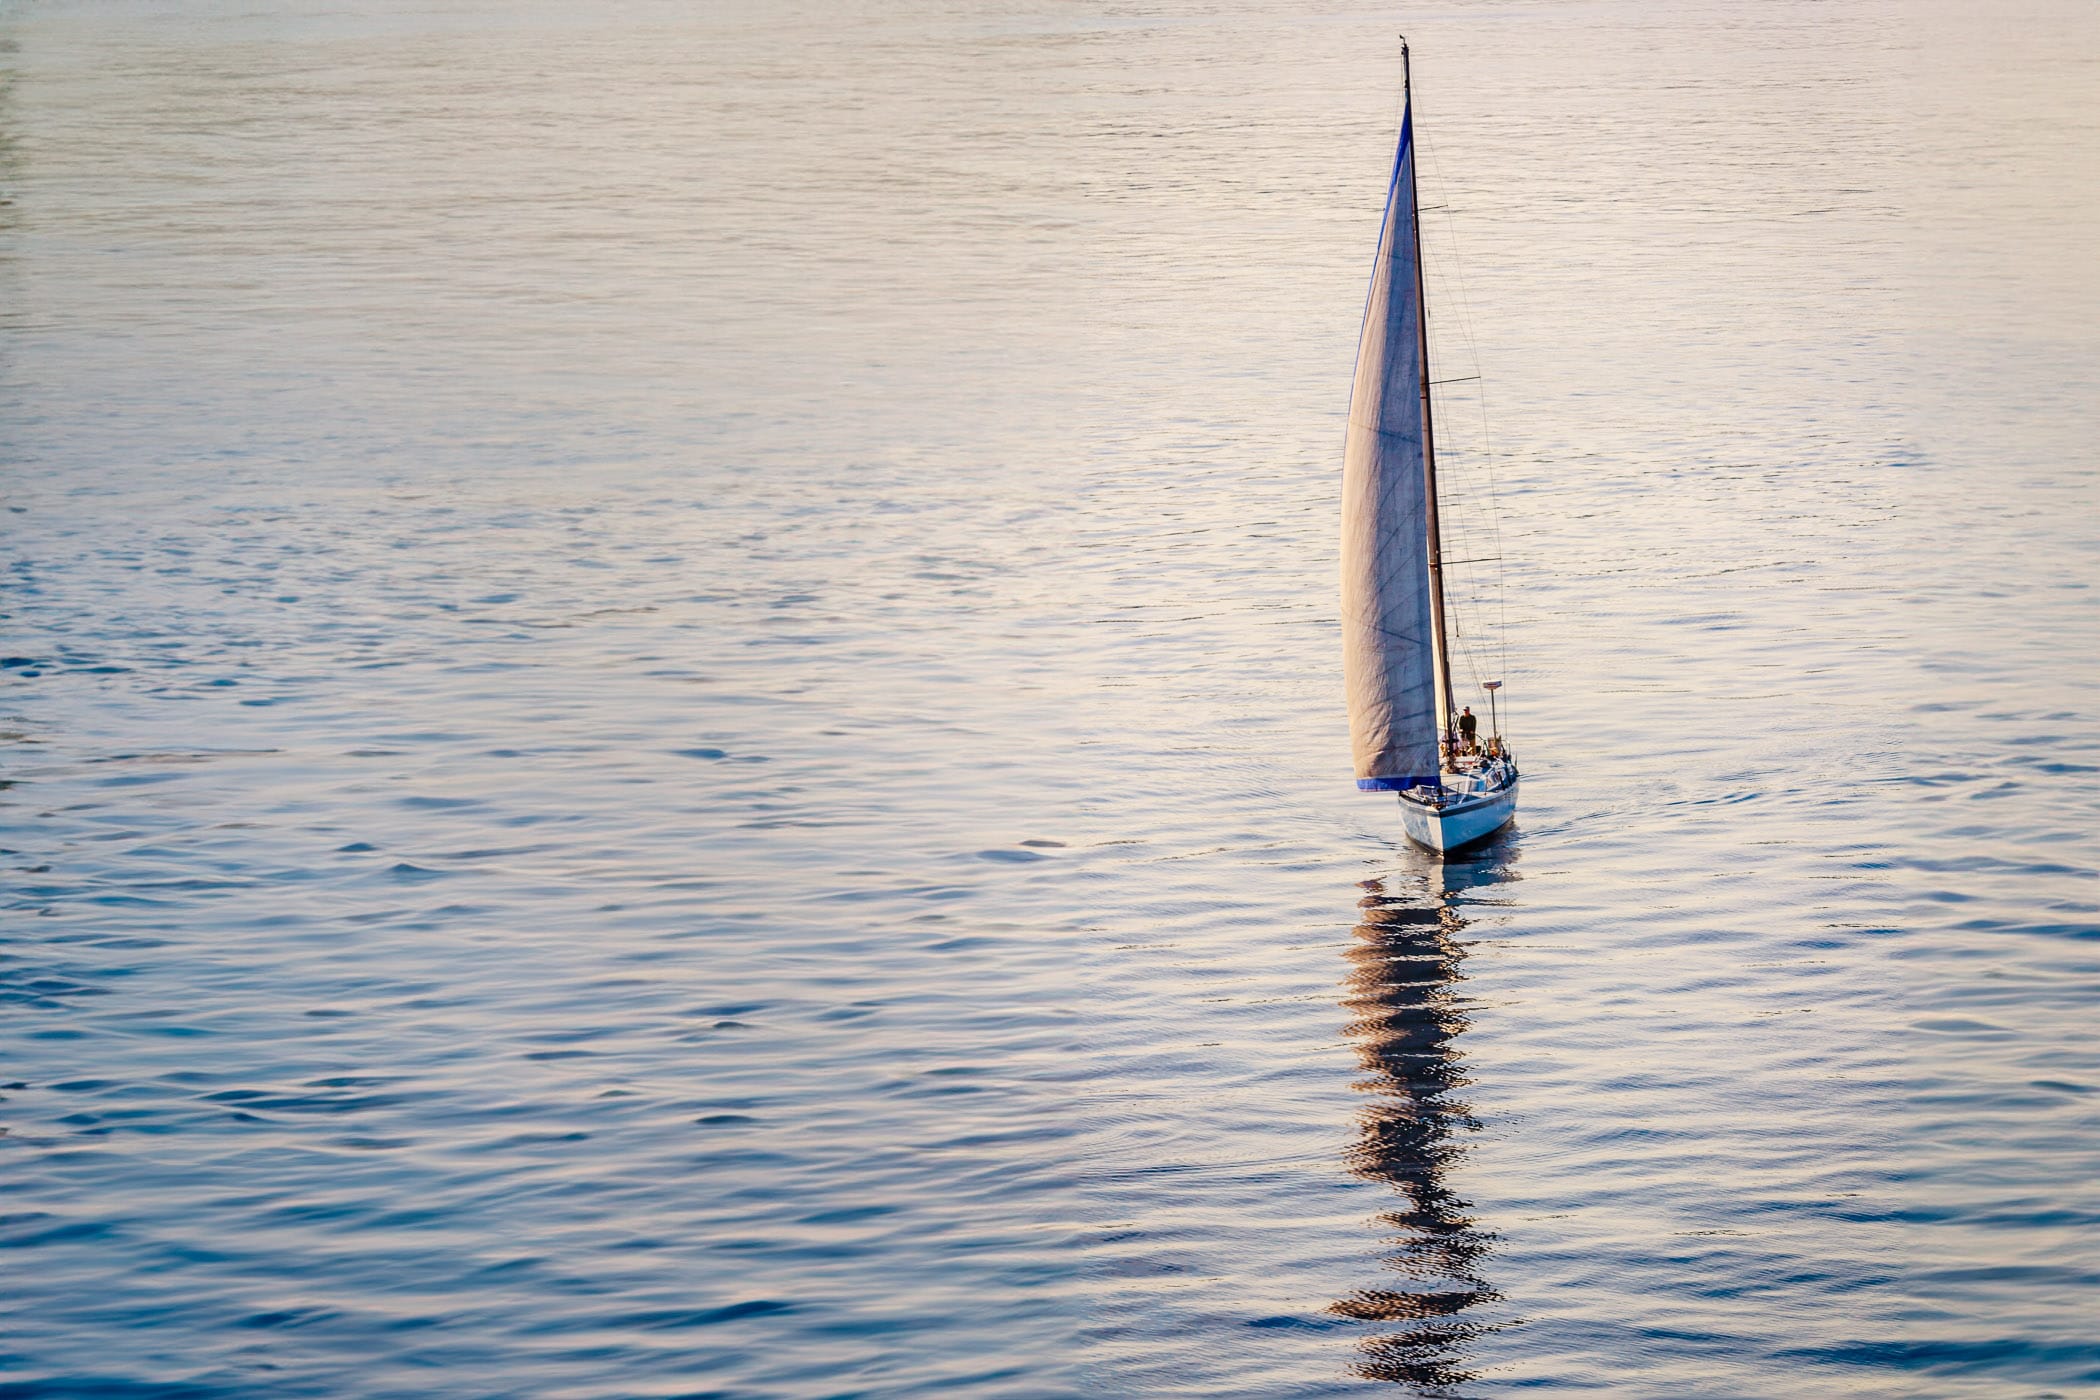 A sailboat navigates the smooth waters of Puget Sound just north of Seattle.